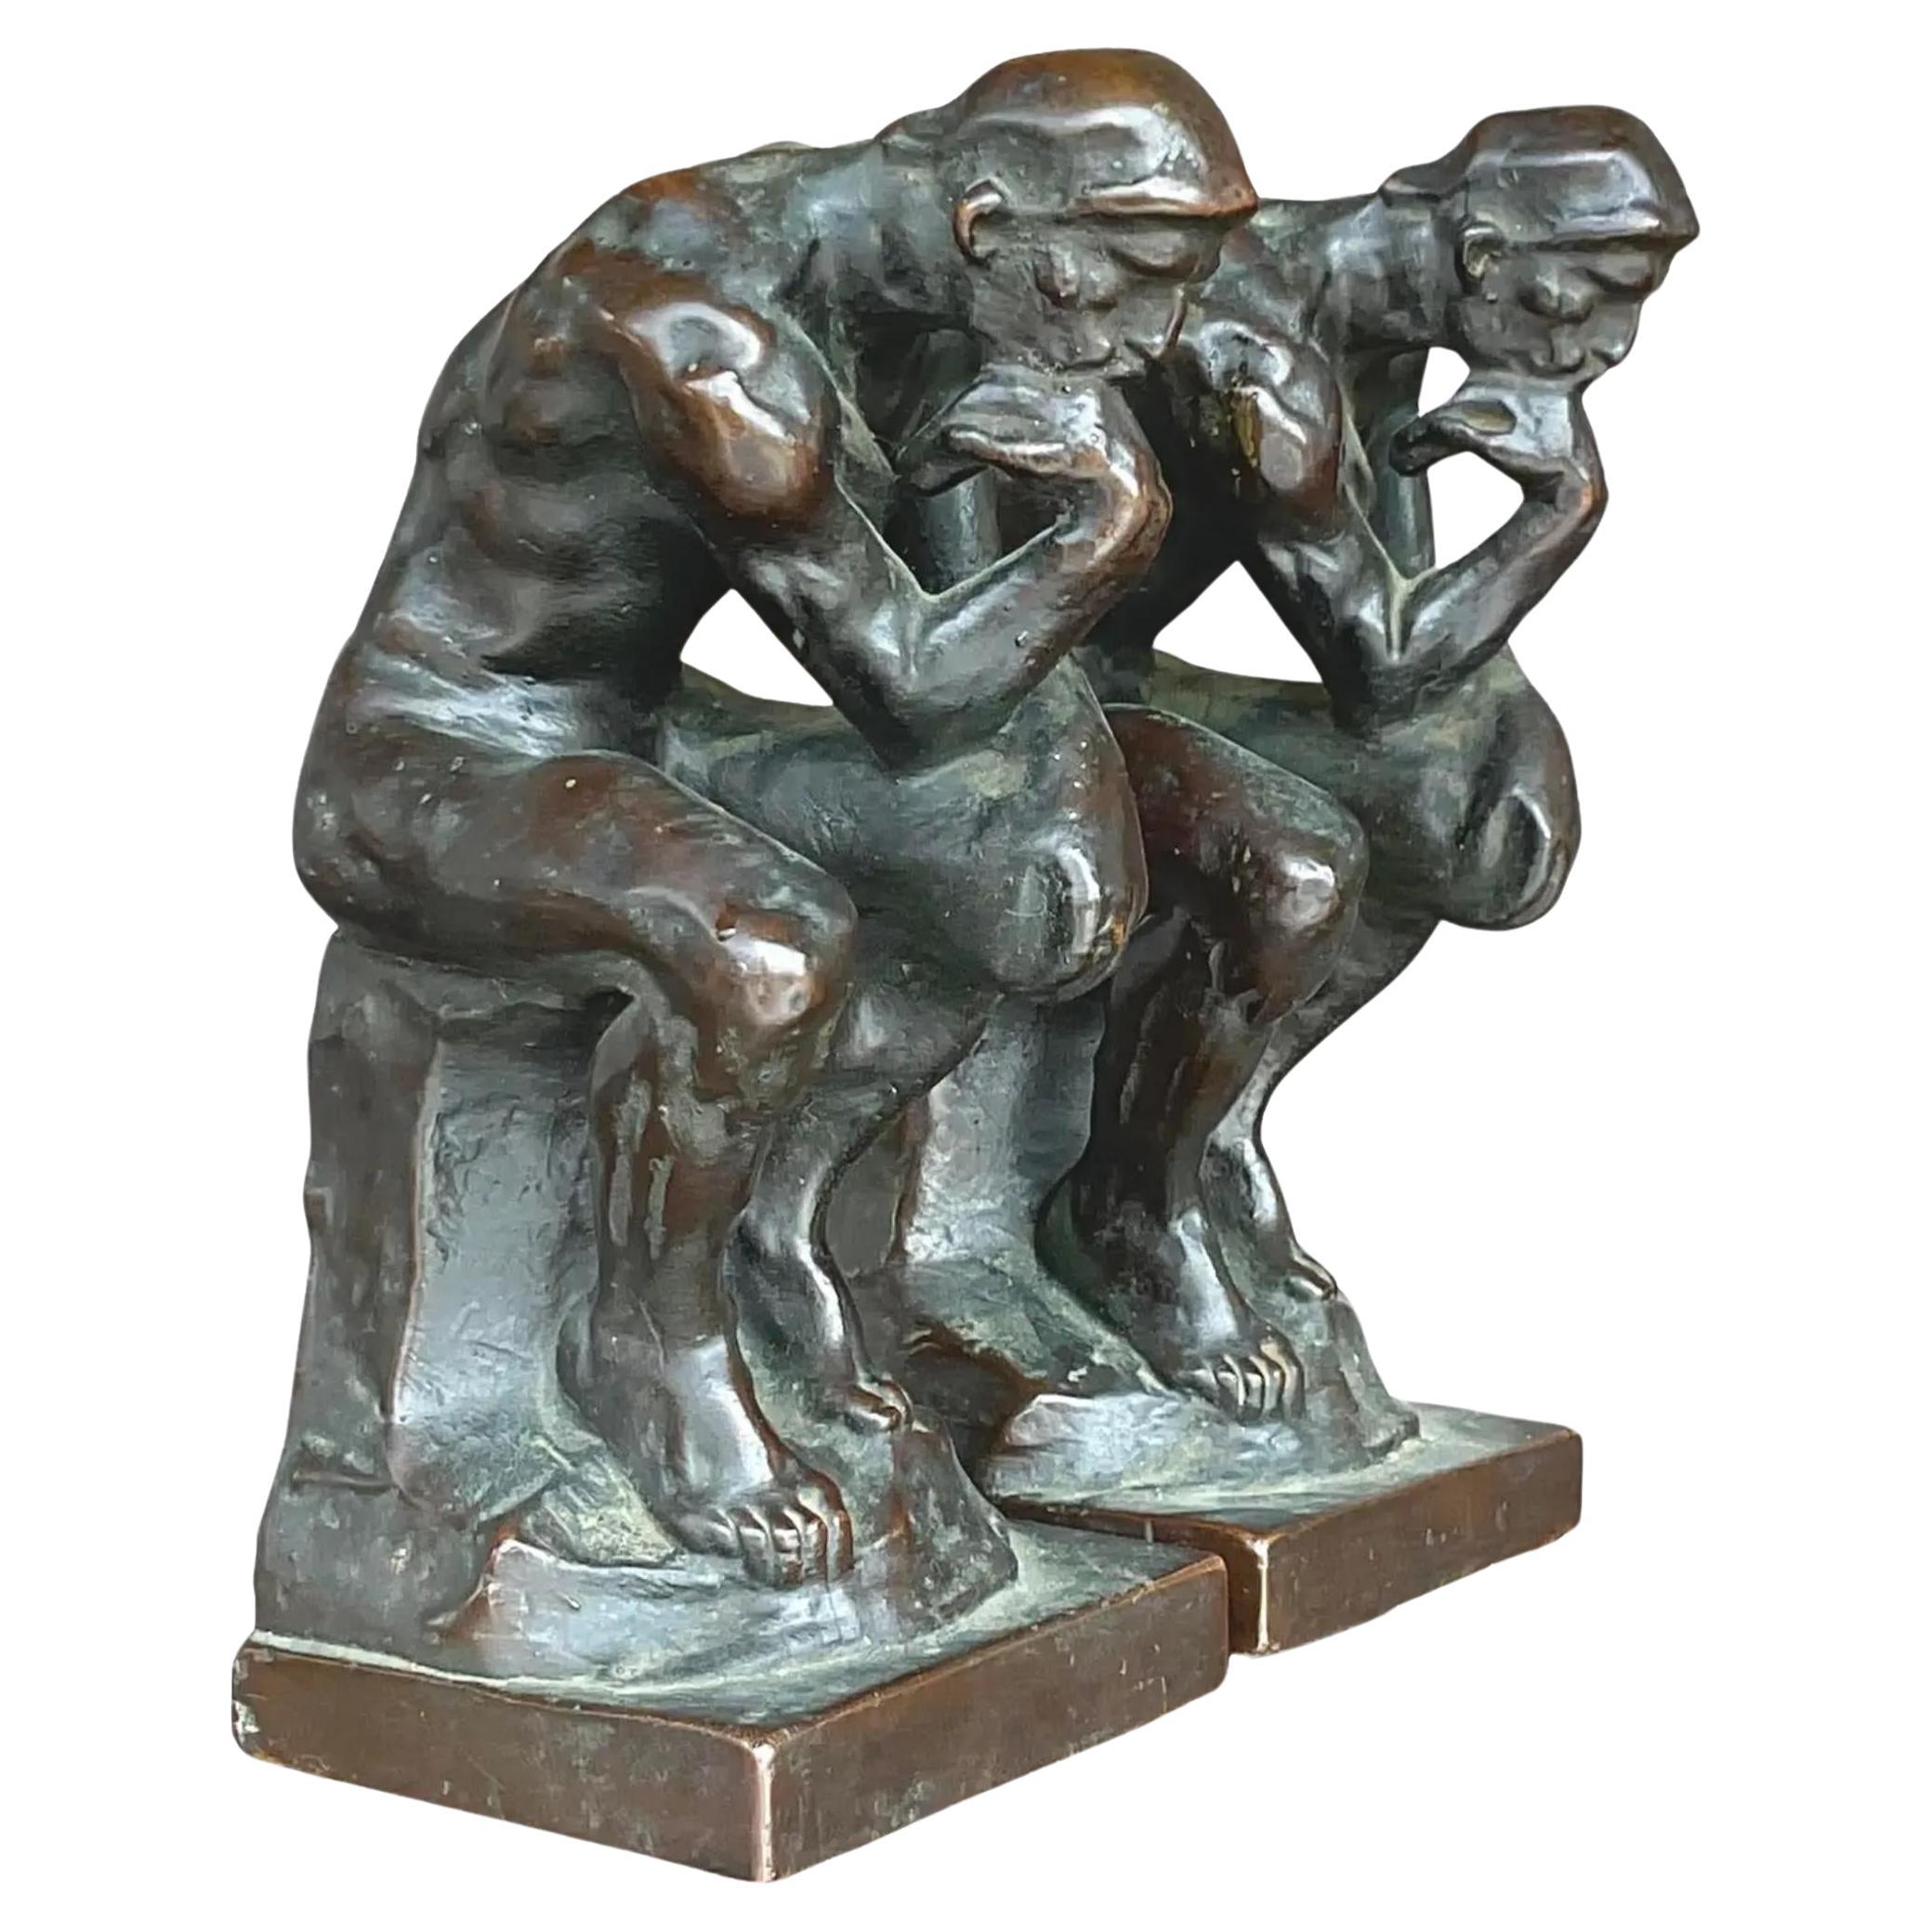 Vintage Regency Patinated Plaster Agusta Rodin “The Thinker” Bookends - a Pair